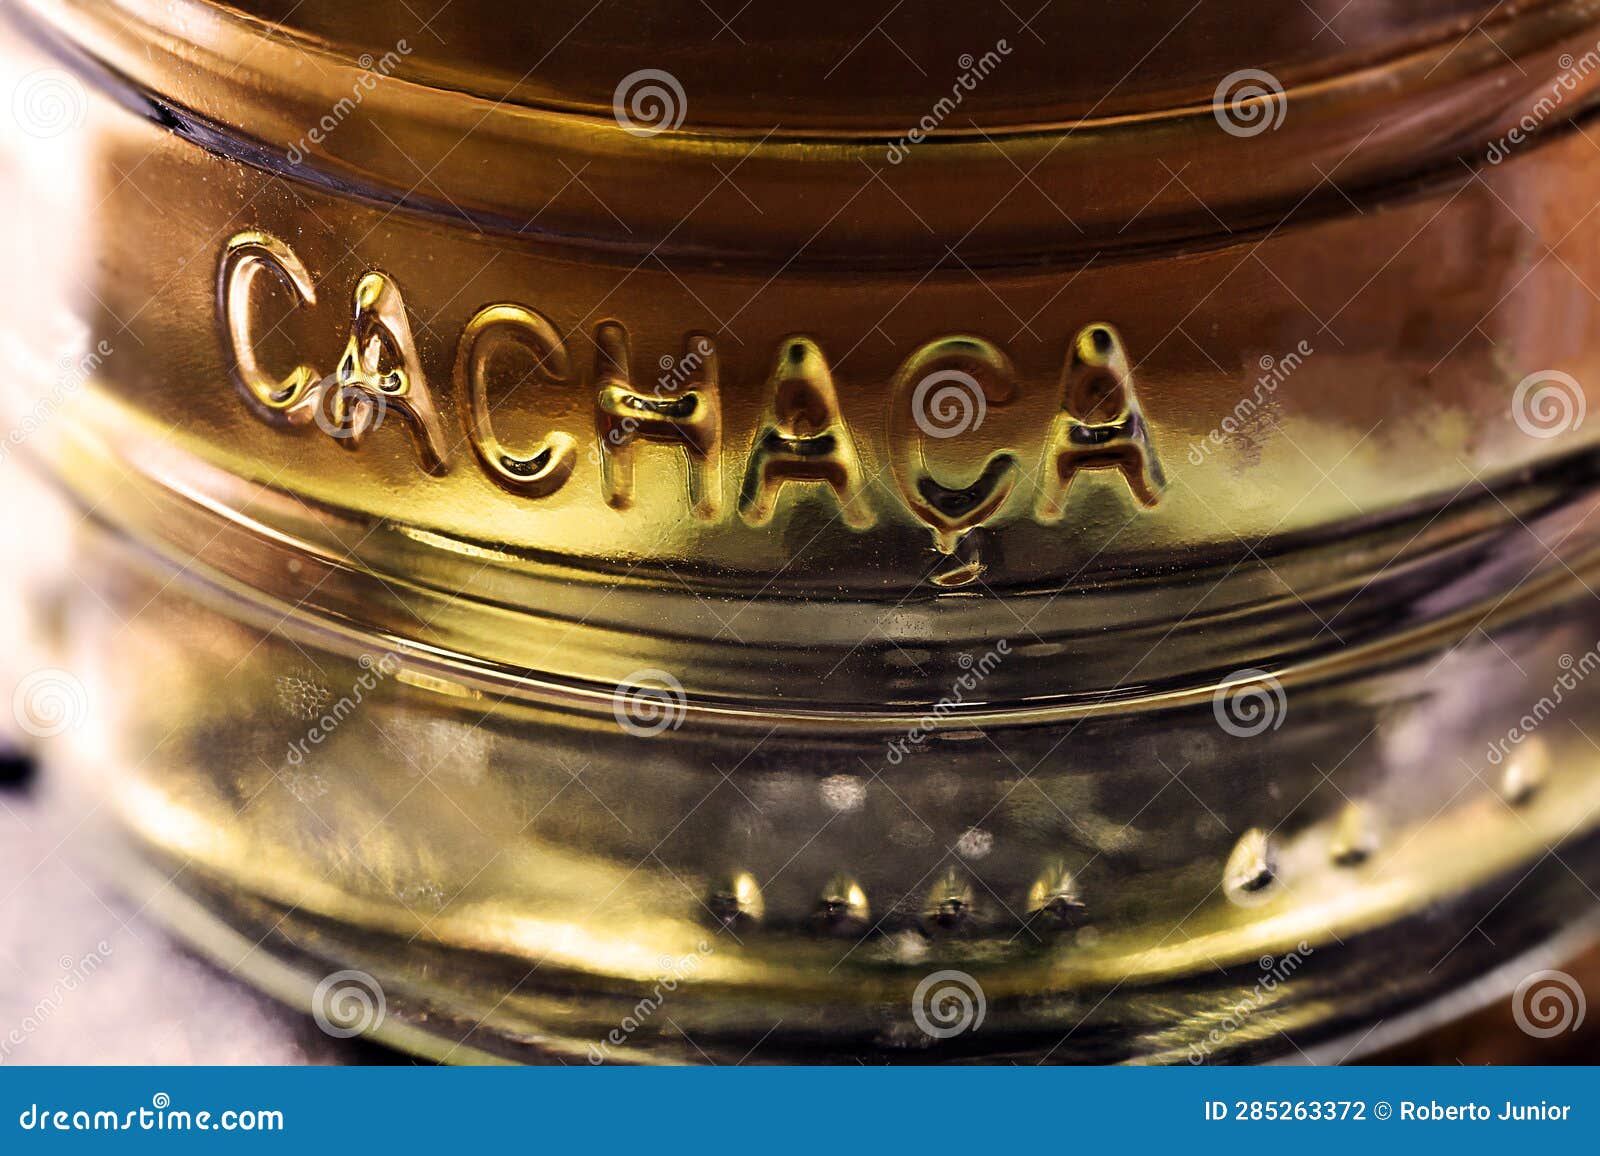 detail of a bottle of cachaÃÂ§a, a typical brazilian drink. brazilian product for export, distilled drink known as aguardente or